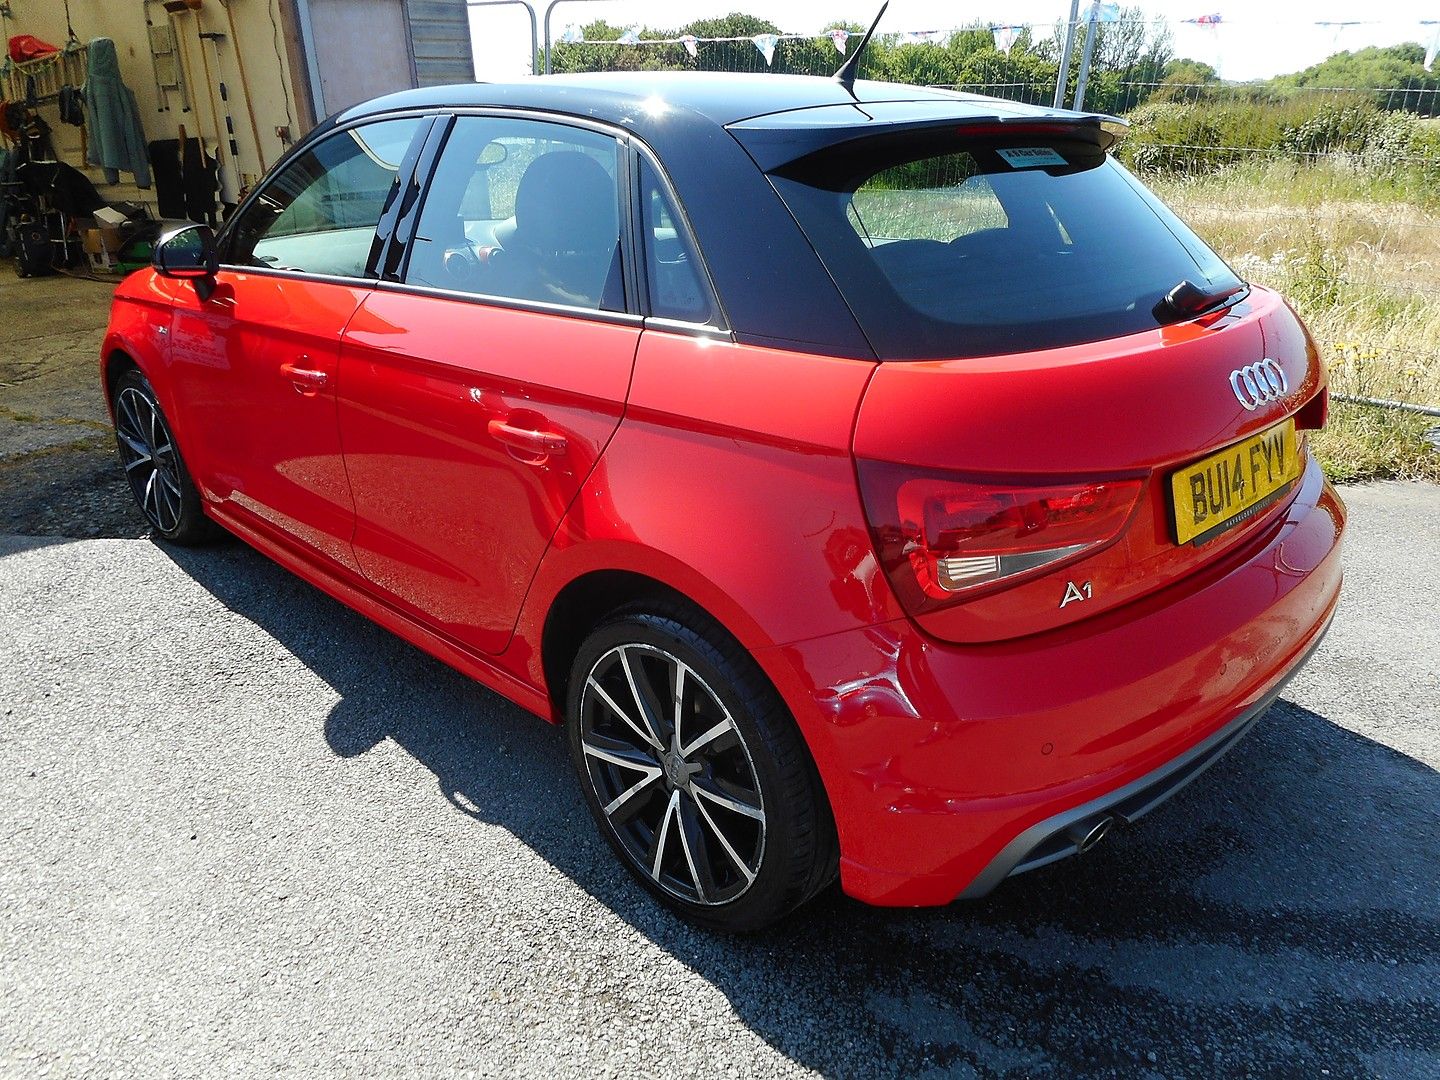 AUDI A1 Sportback 1.6 TDI S line Style Edition 105PS (2014) - Picture 5